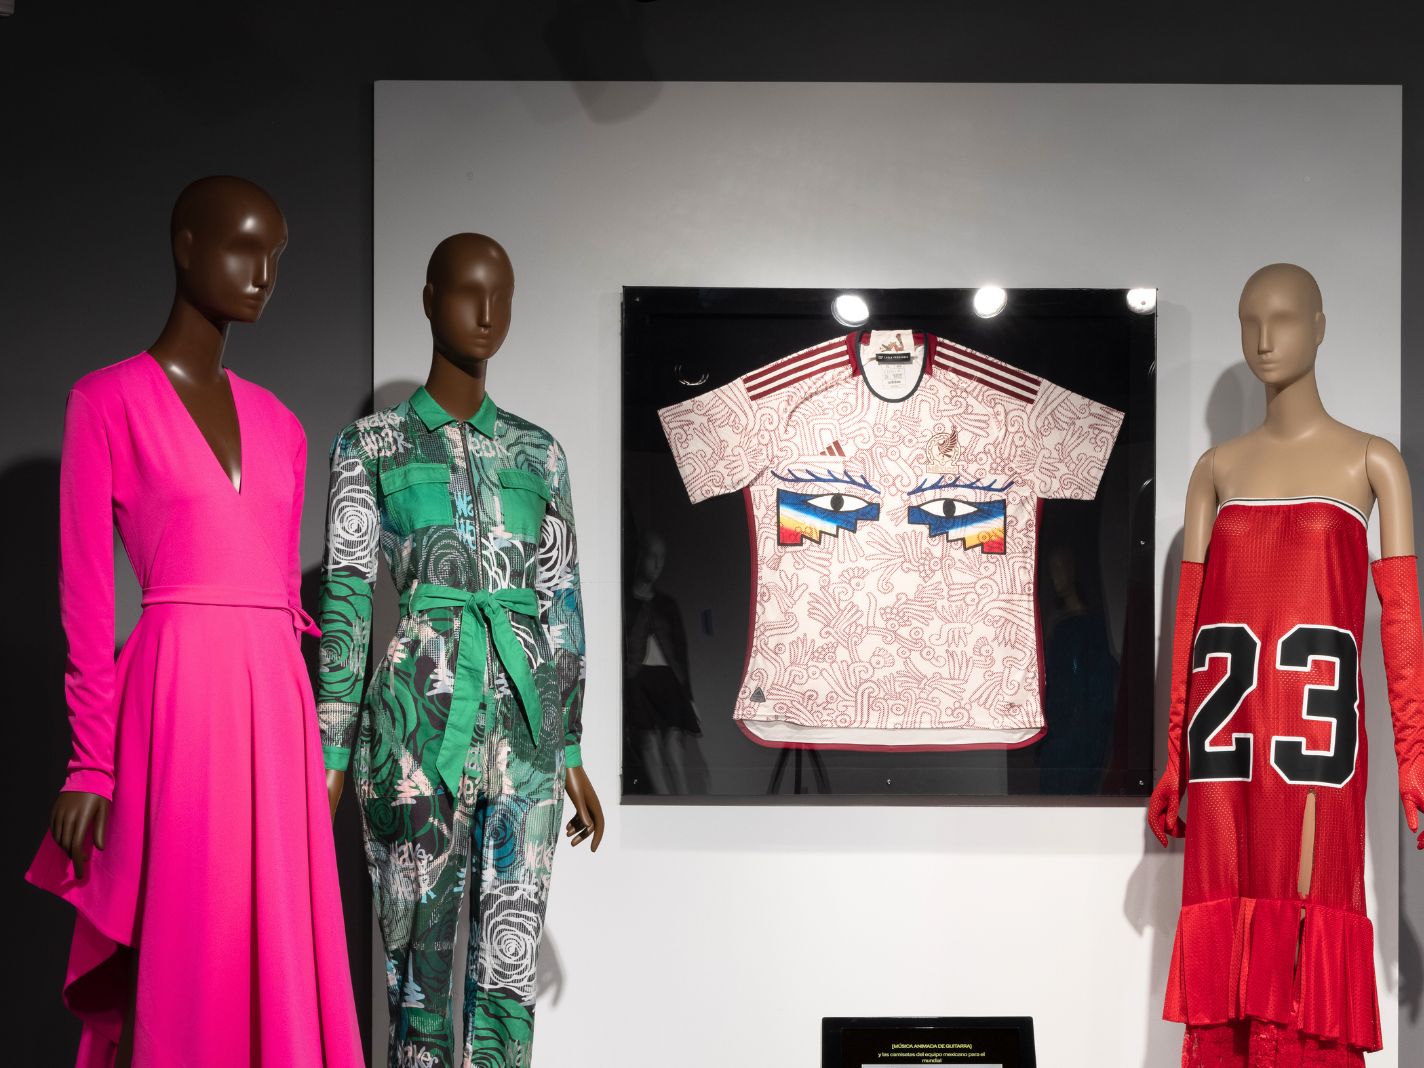 Moda Hoy! Exhibit Features Over 60 Pieces by Latin American